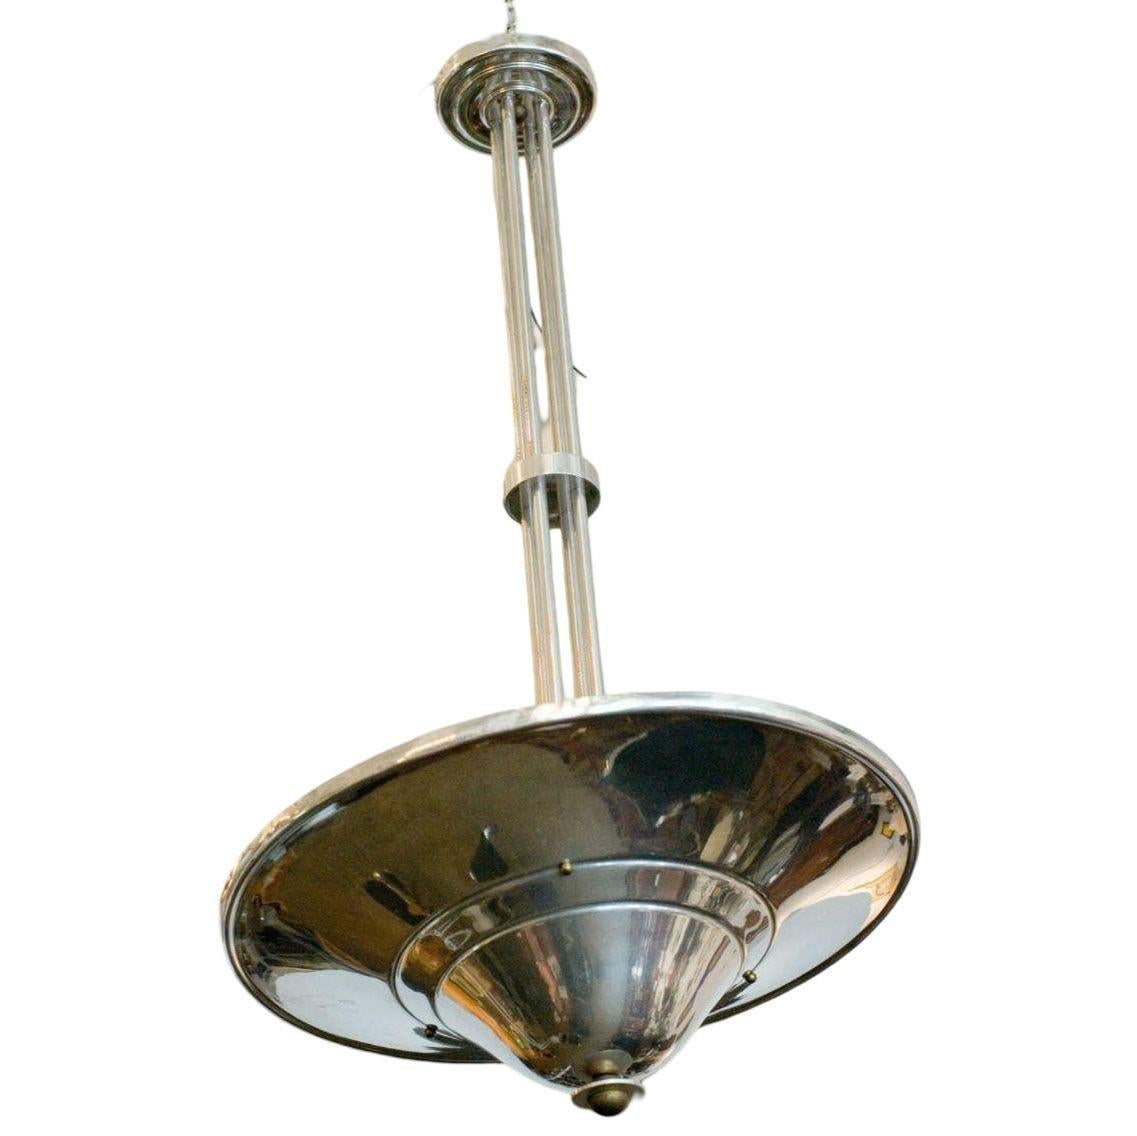 American Art Deco era chrome saucer ceiling lamp with bronze end cap and polished aluminum stem. The lamp was a 43